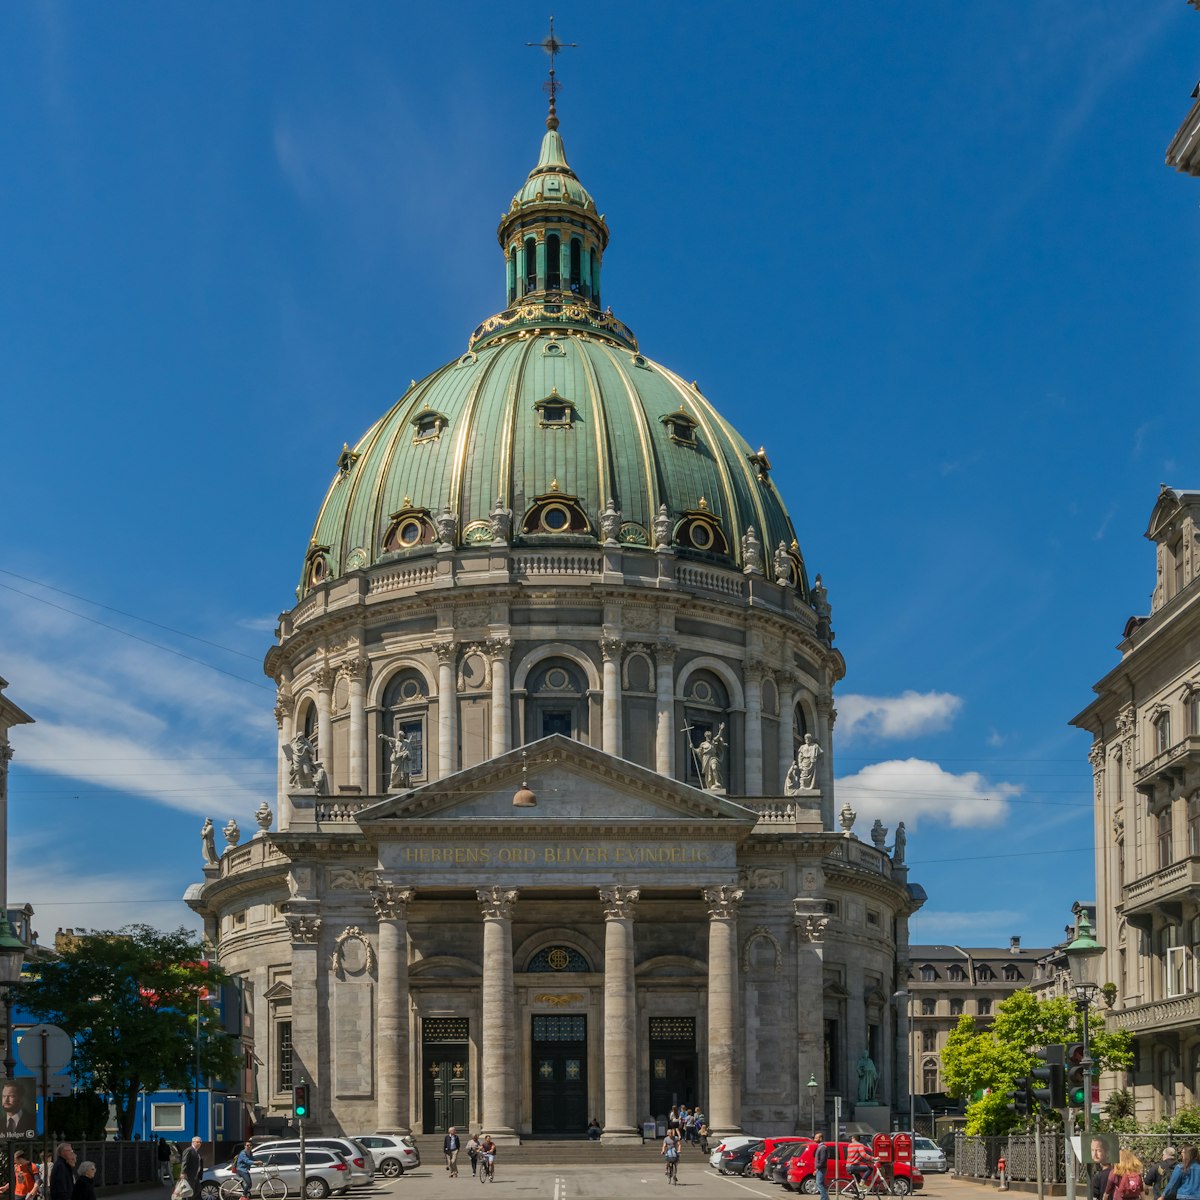 The majestic Frederik's Church with it's impressive dome, also known as the Marble Church, forms with its rococo architecture a central point of the Frederiksstaden district.